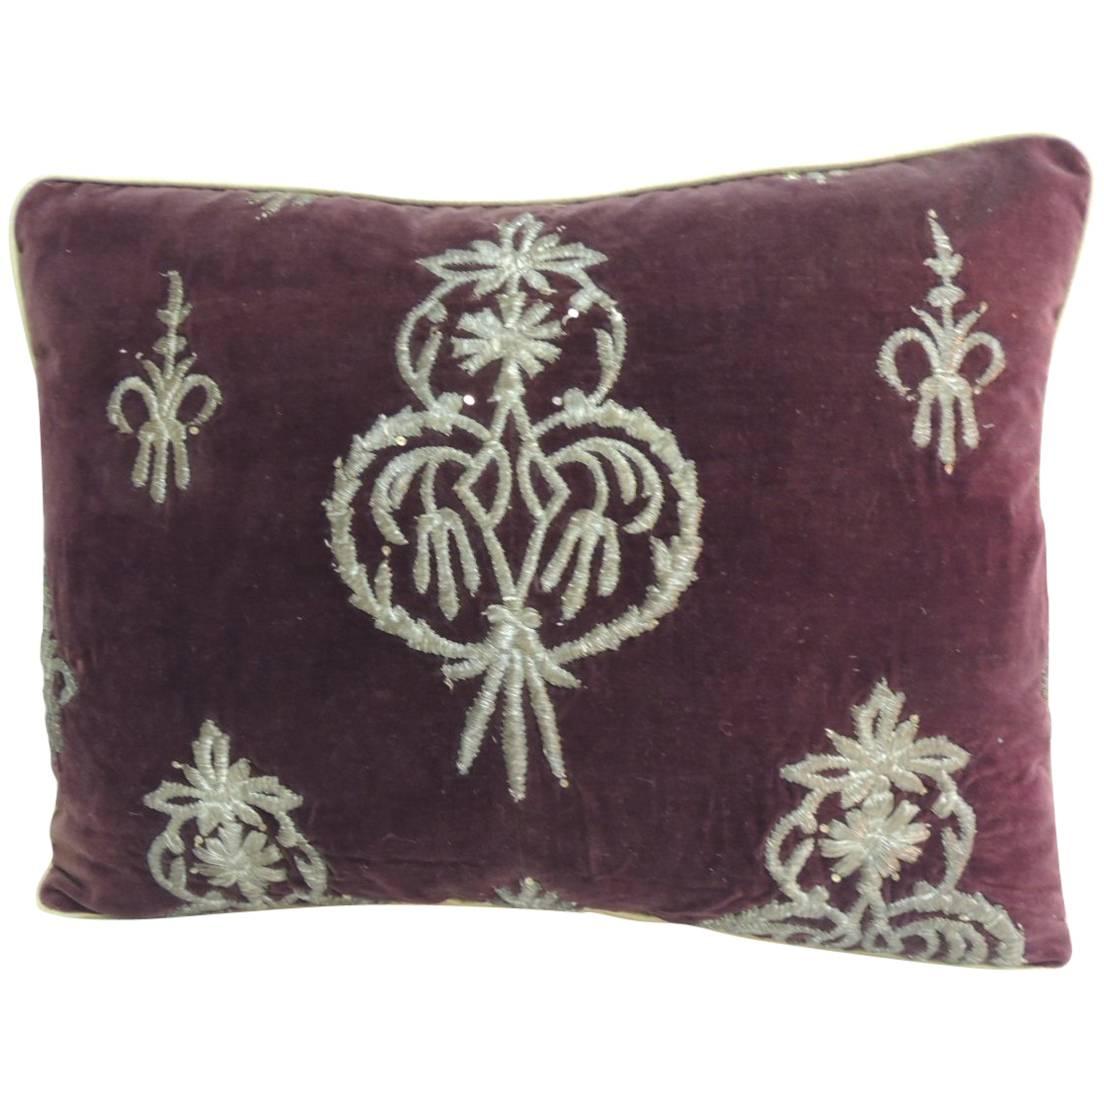 18th Century Persian Metallic Threads Embroidered Decorative Pillow